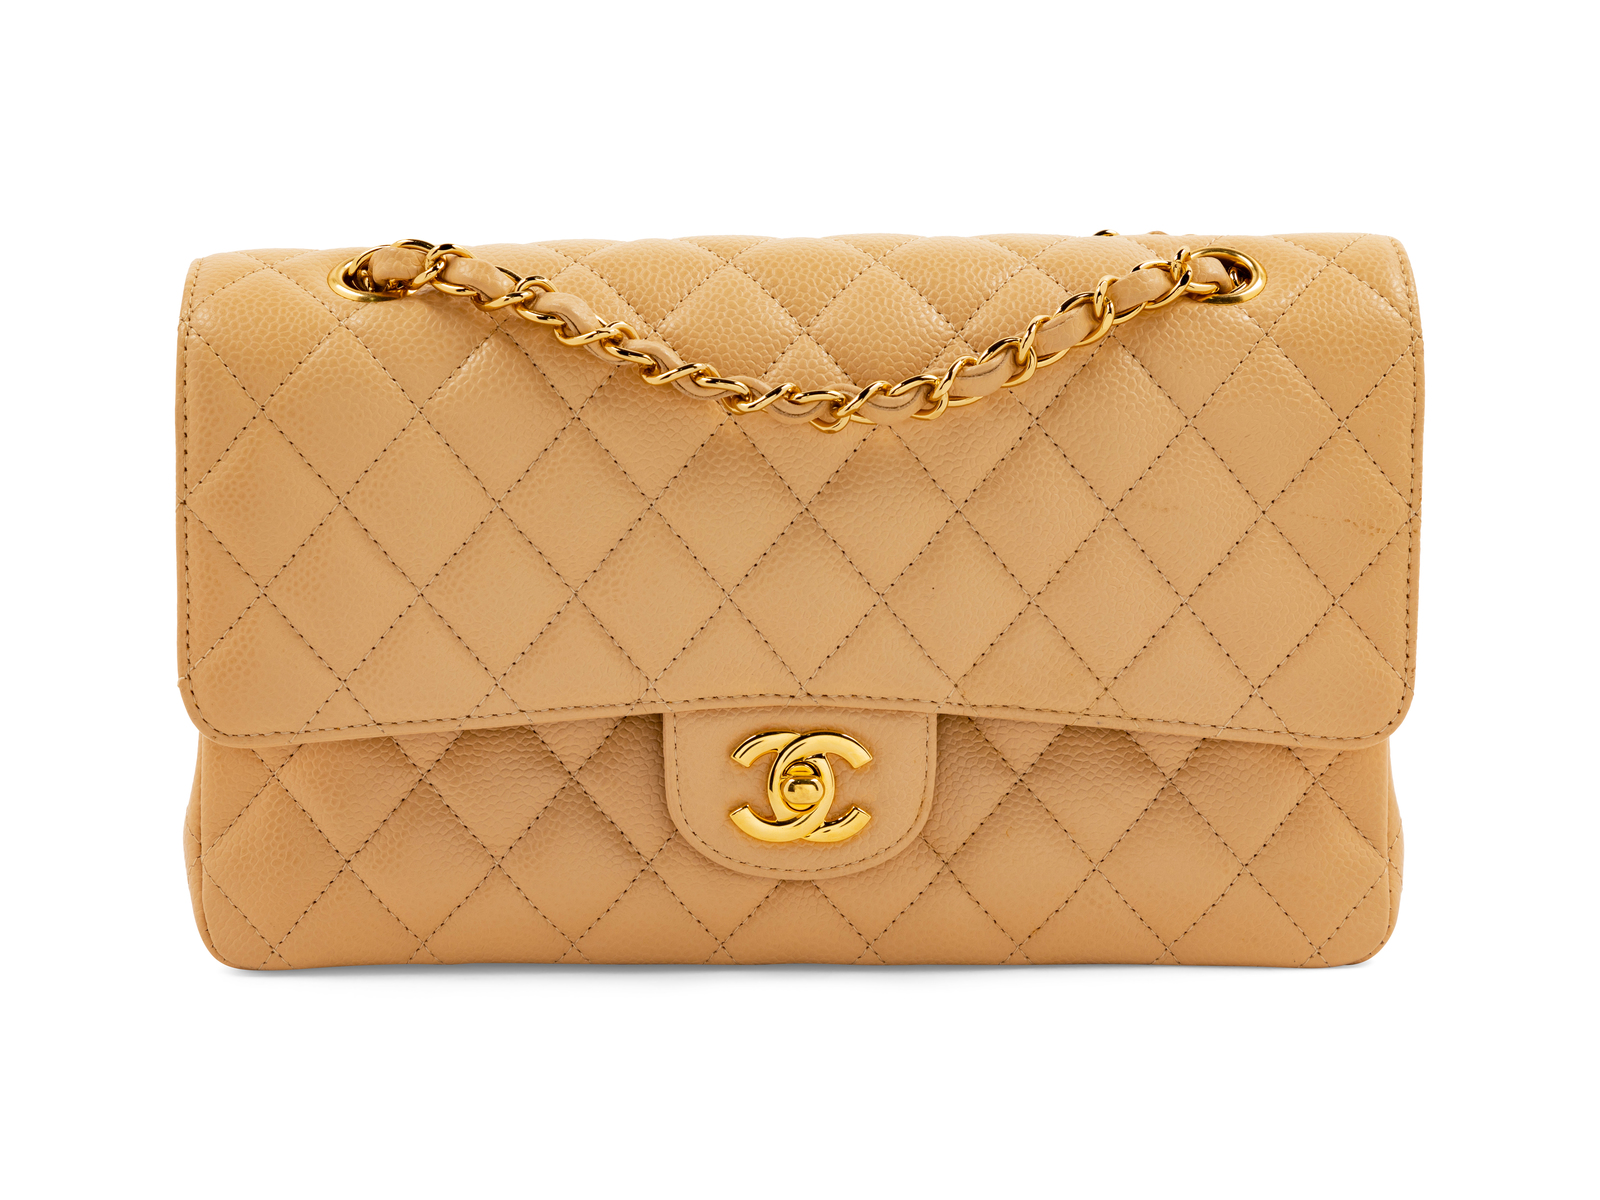 Sold at Auction: Chanel Beige Quilted Mini Flap Bag